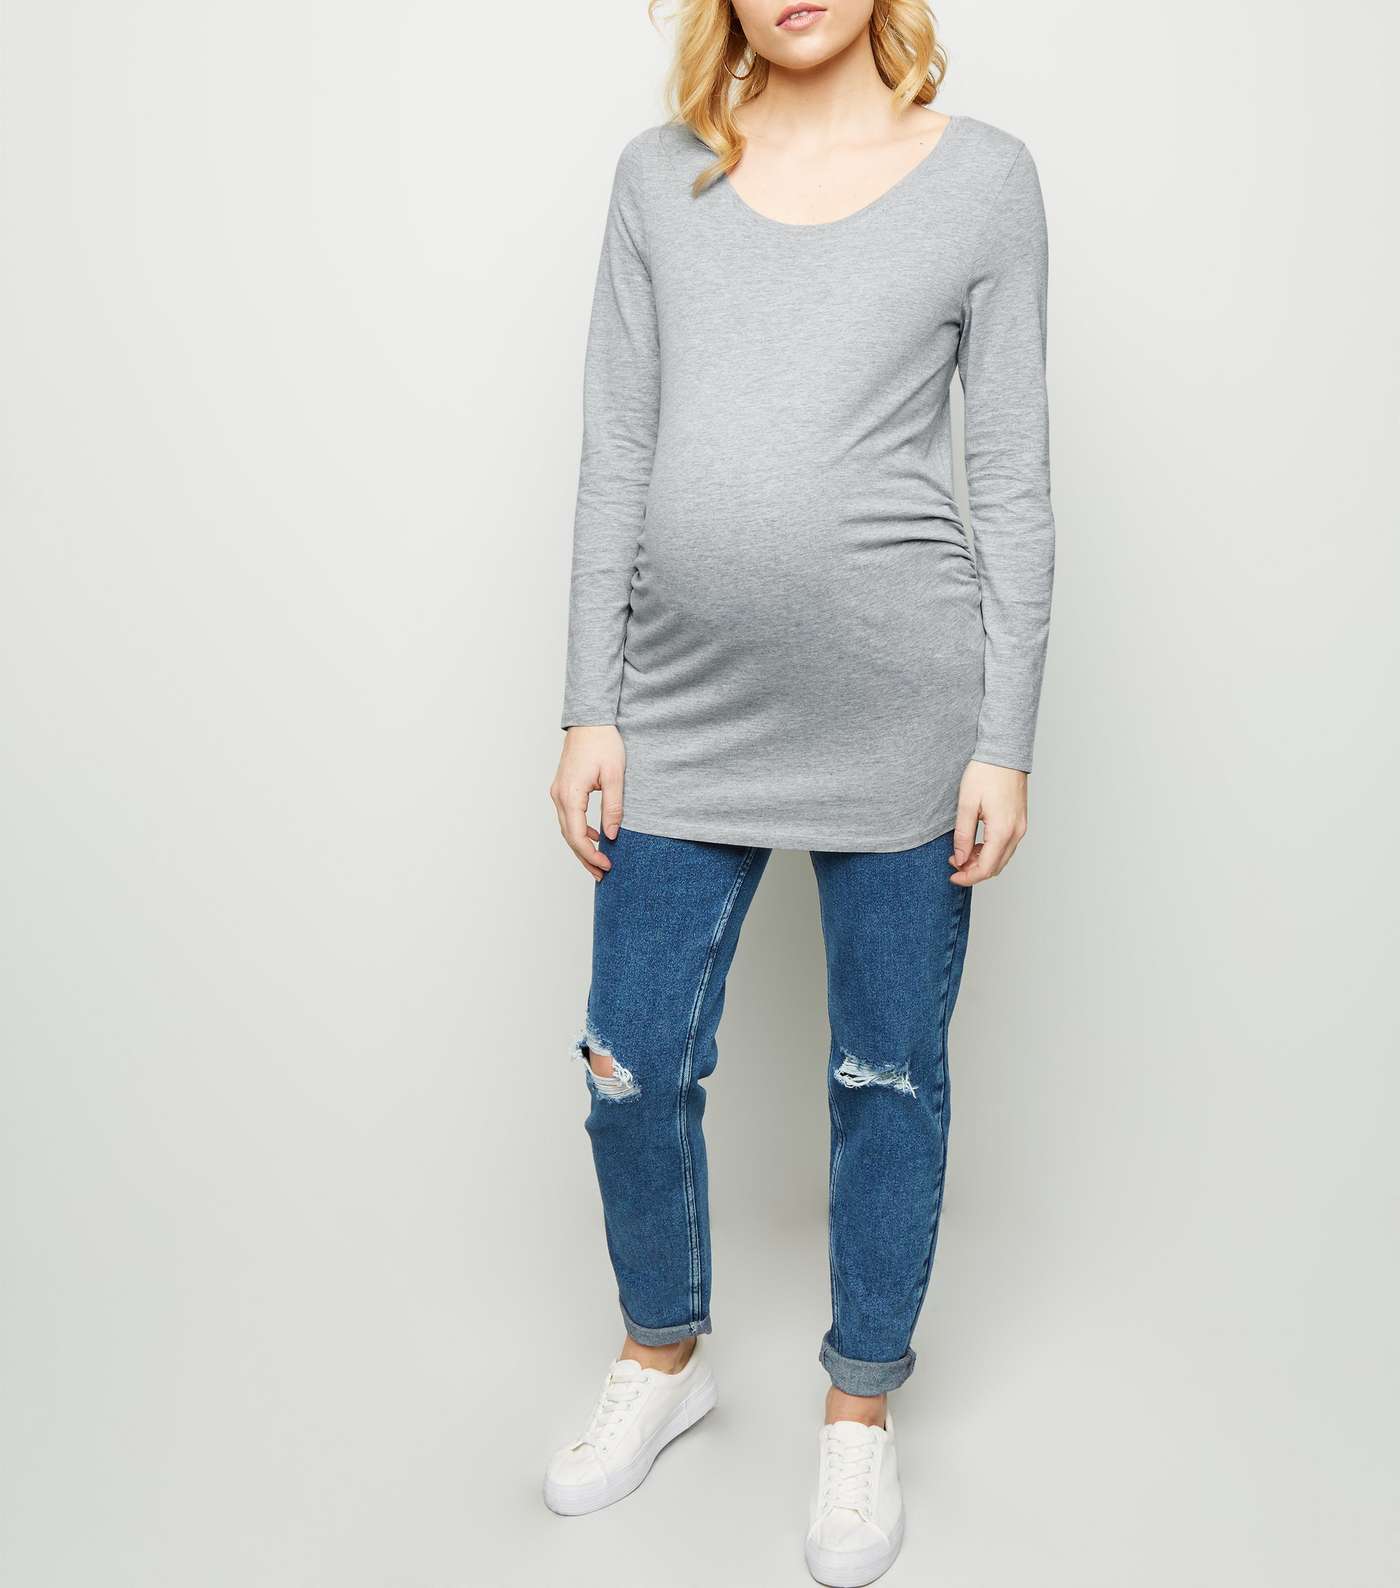 Maternity Pale Grey Long Sleeve Top Image 2